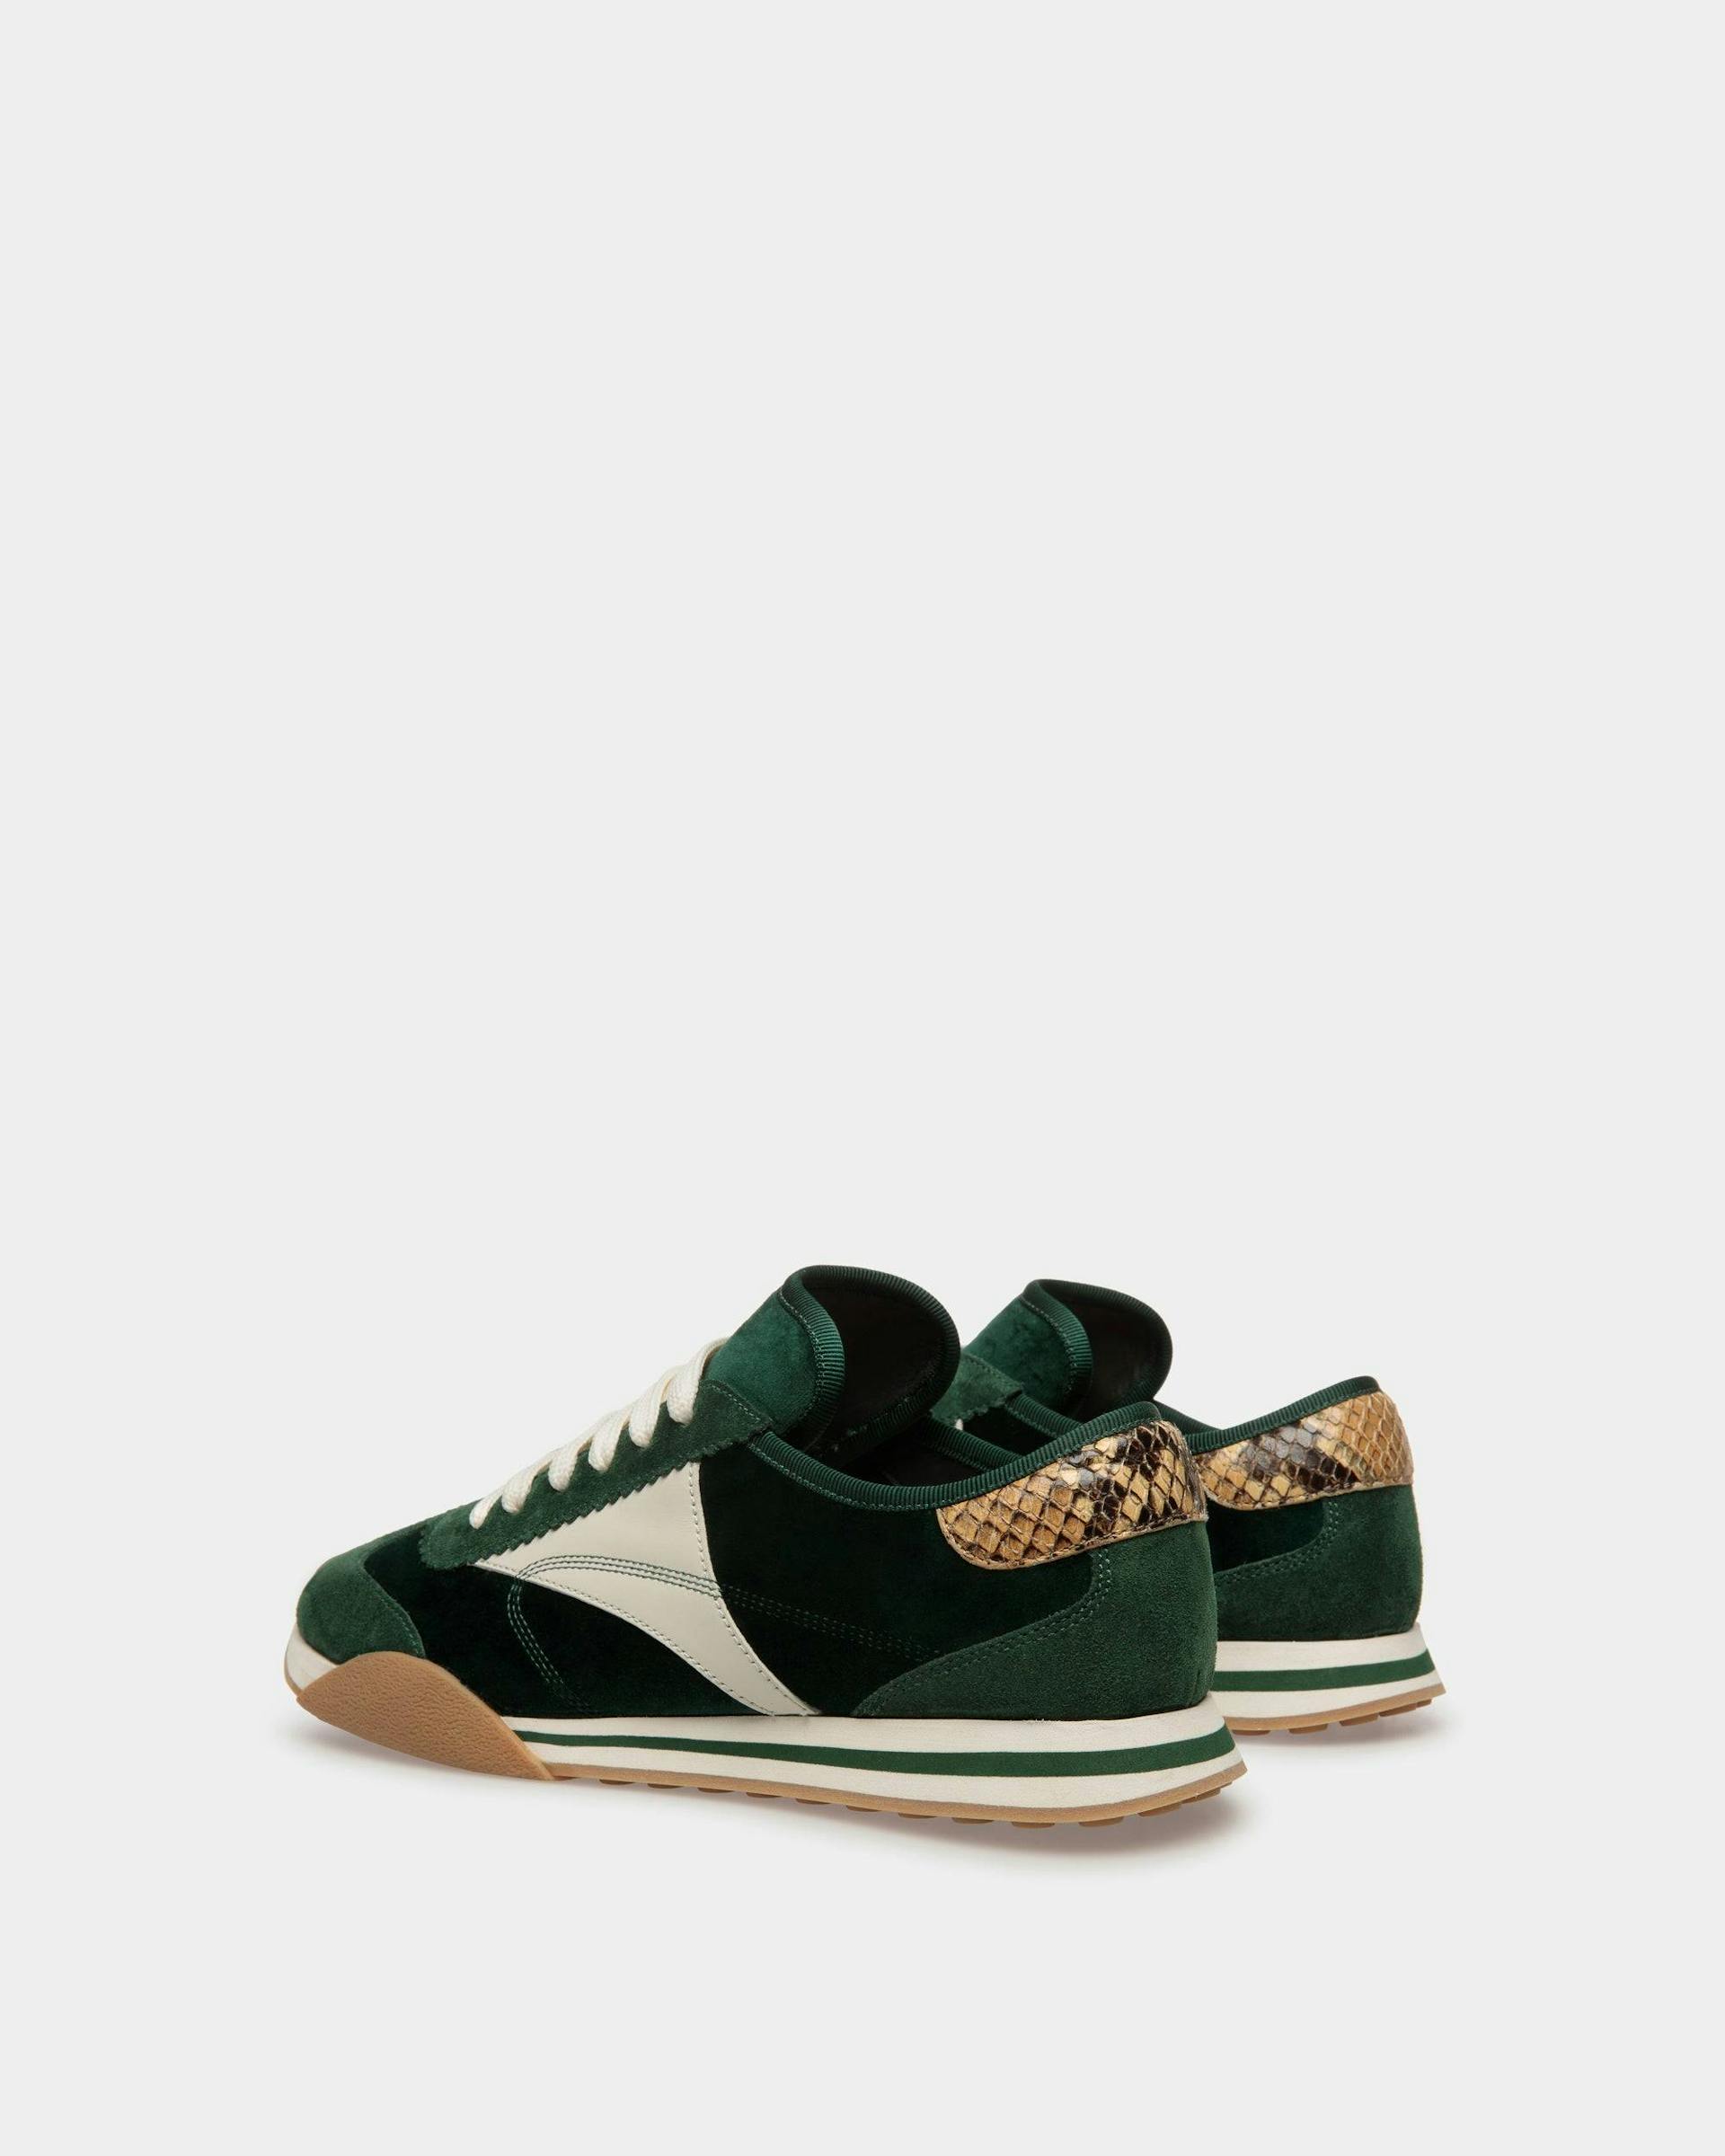 Sussex Sneakers In Green And Dusty White Leather And Cotton - Men's - Bally - 04